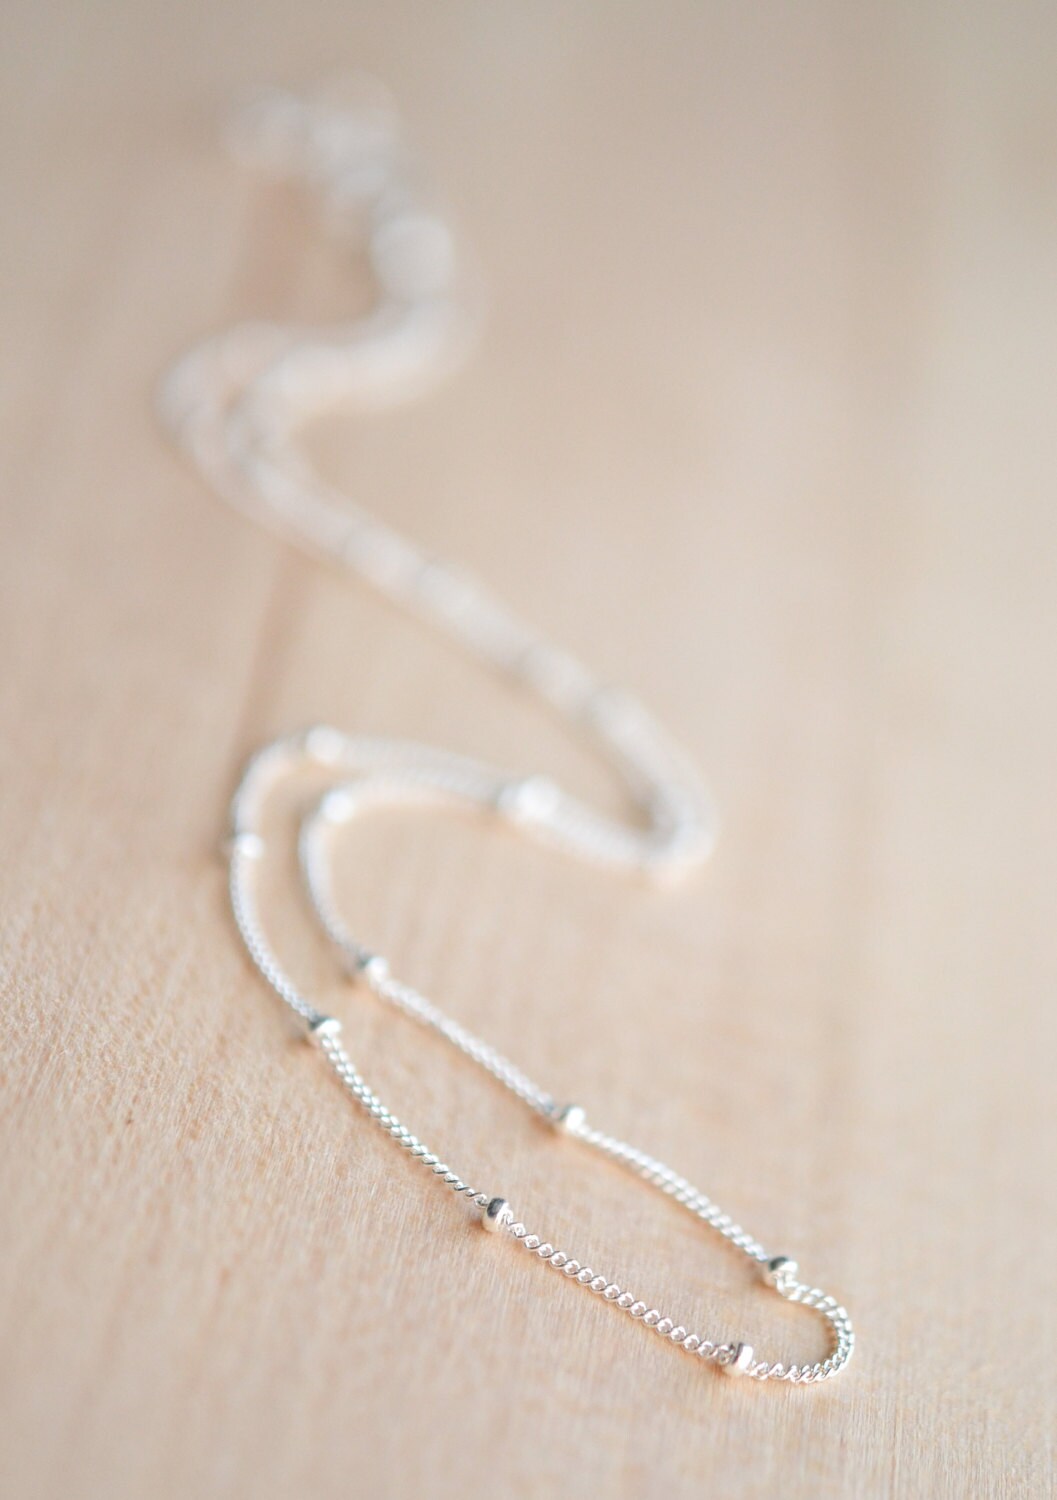 Sterling Silver Bead Chain Necklace // Plain Silver Necklace // Add your Own Charm // Plain Sterling Silver Chain // Choose Your Length